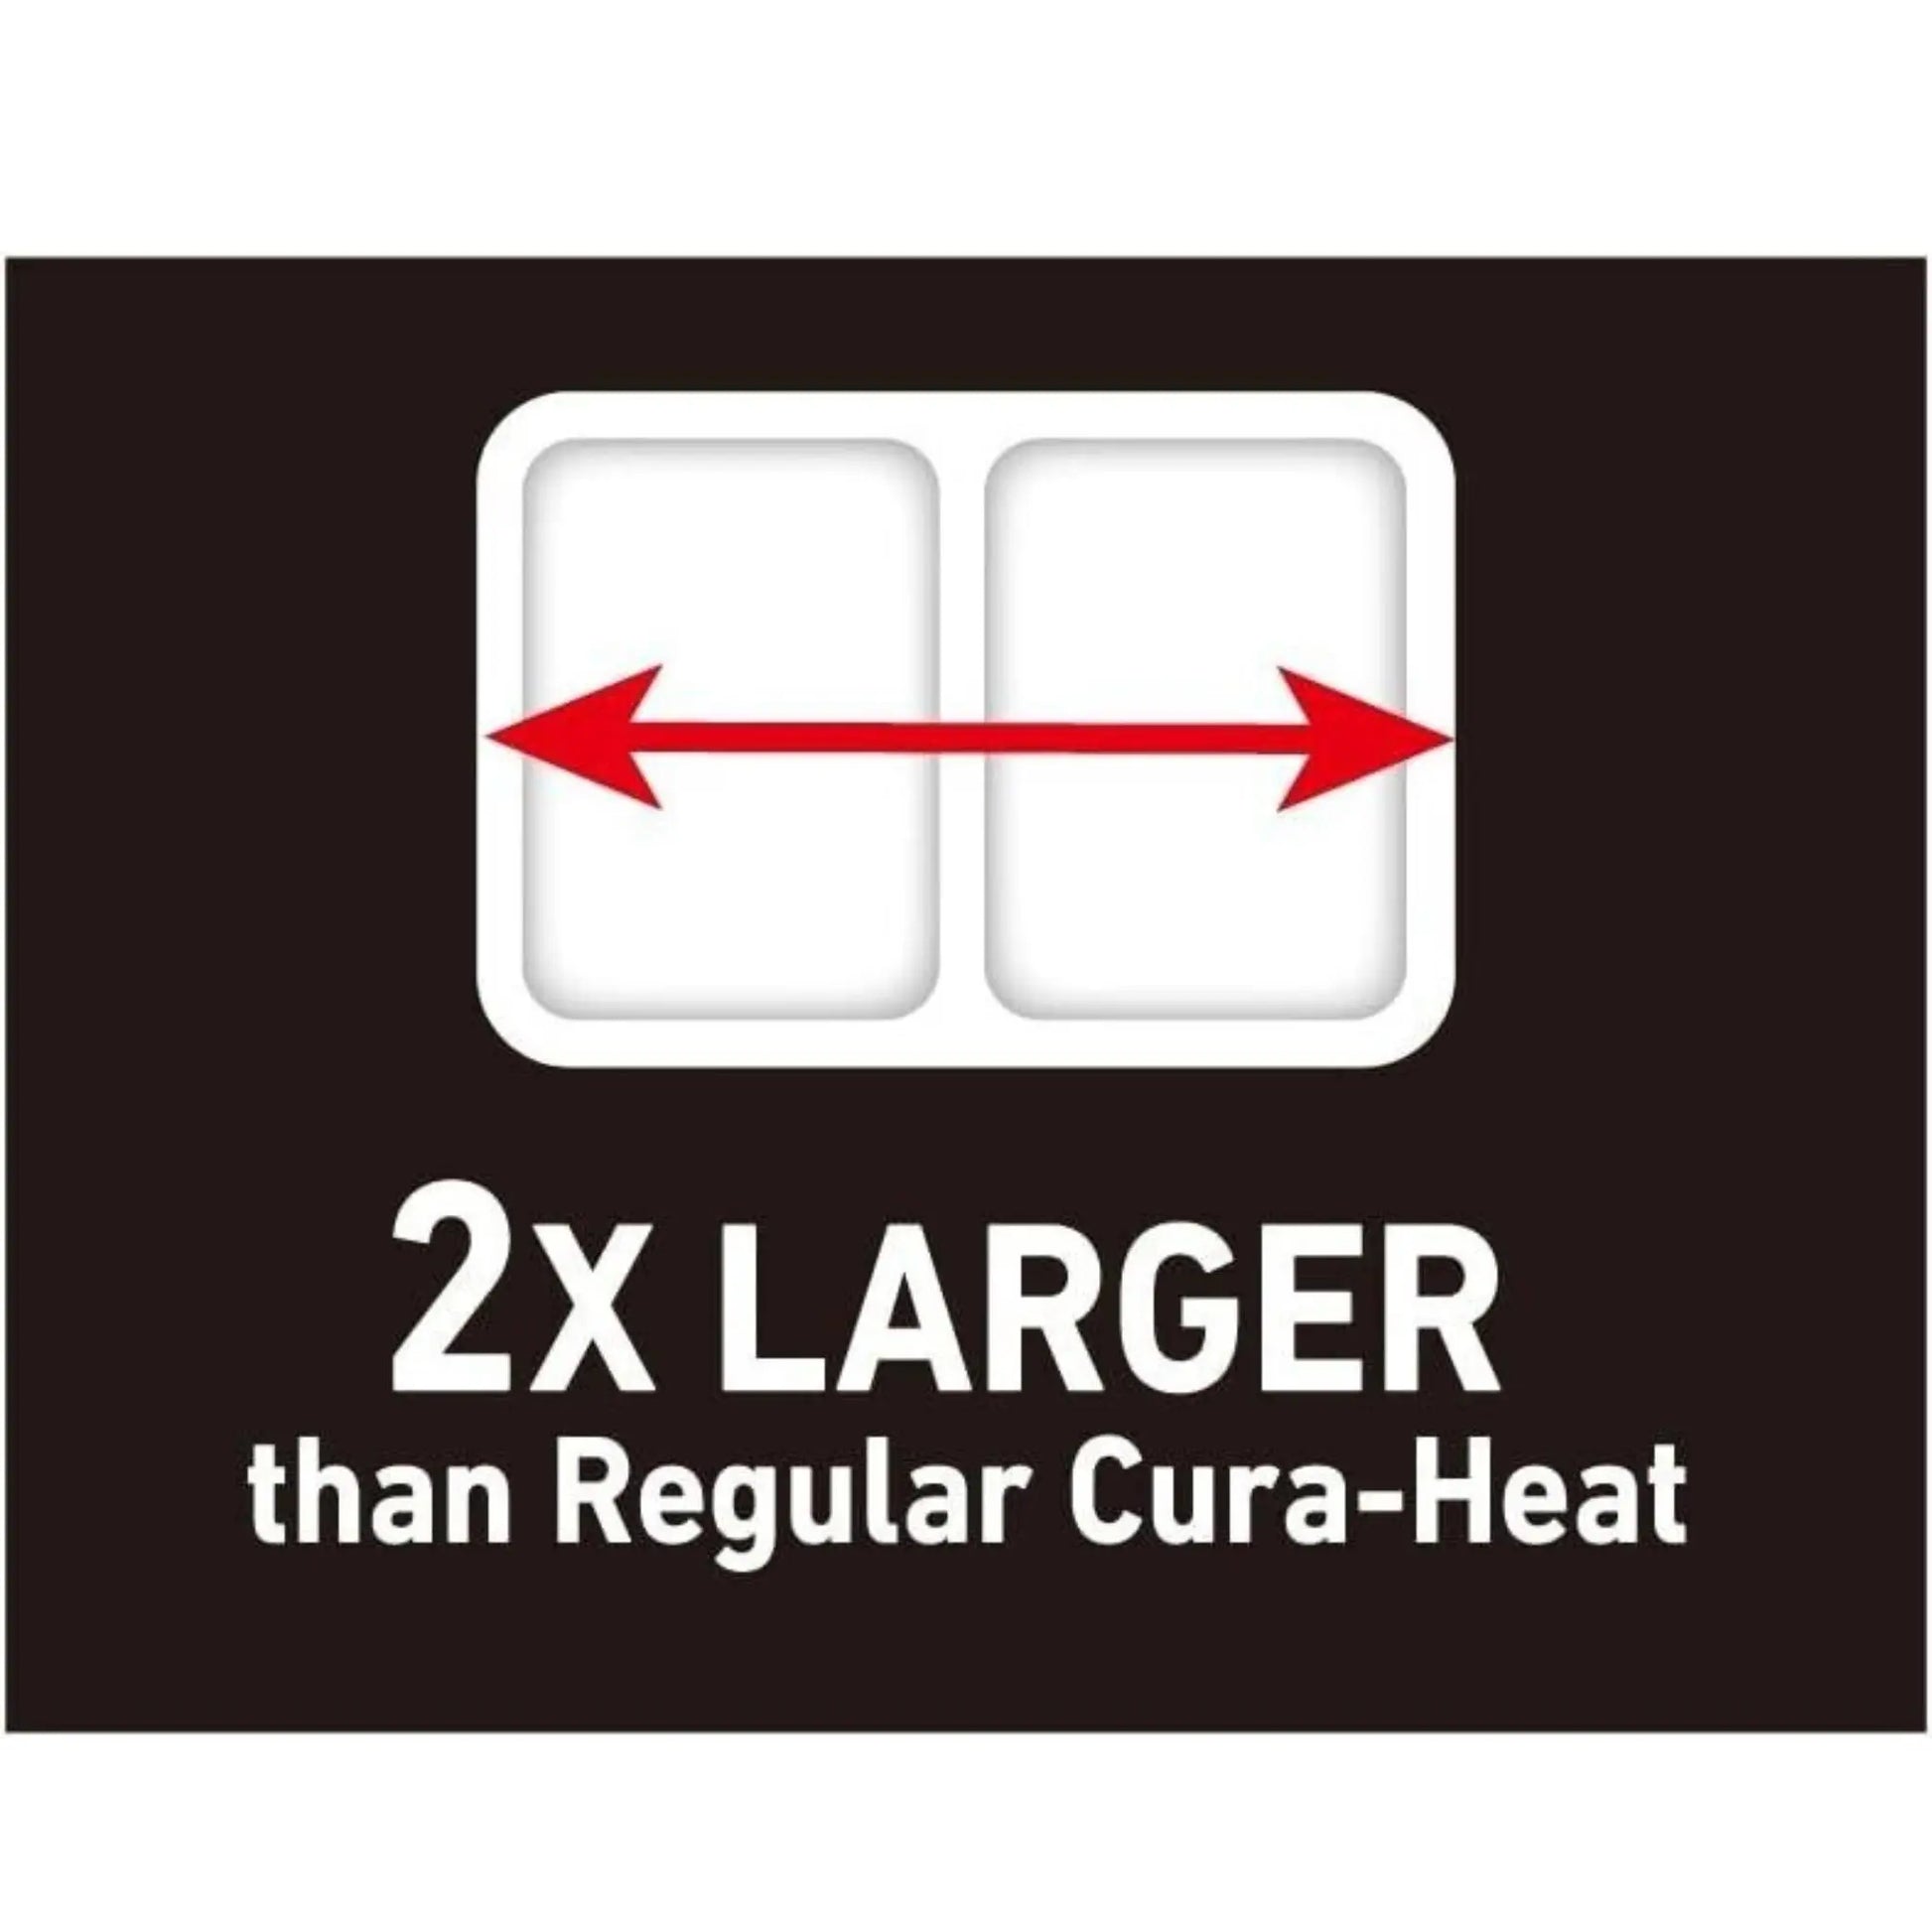 Cura-Heat Back Pain MAX size Direct-to-Skin, Pack of 2 Cura Heat